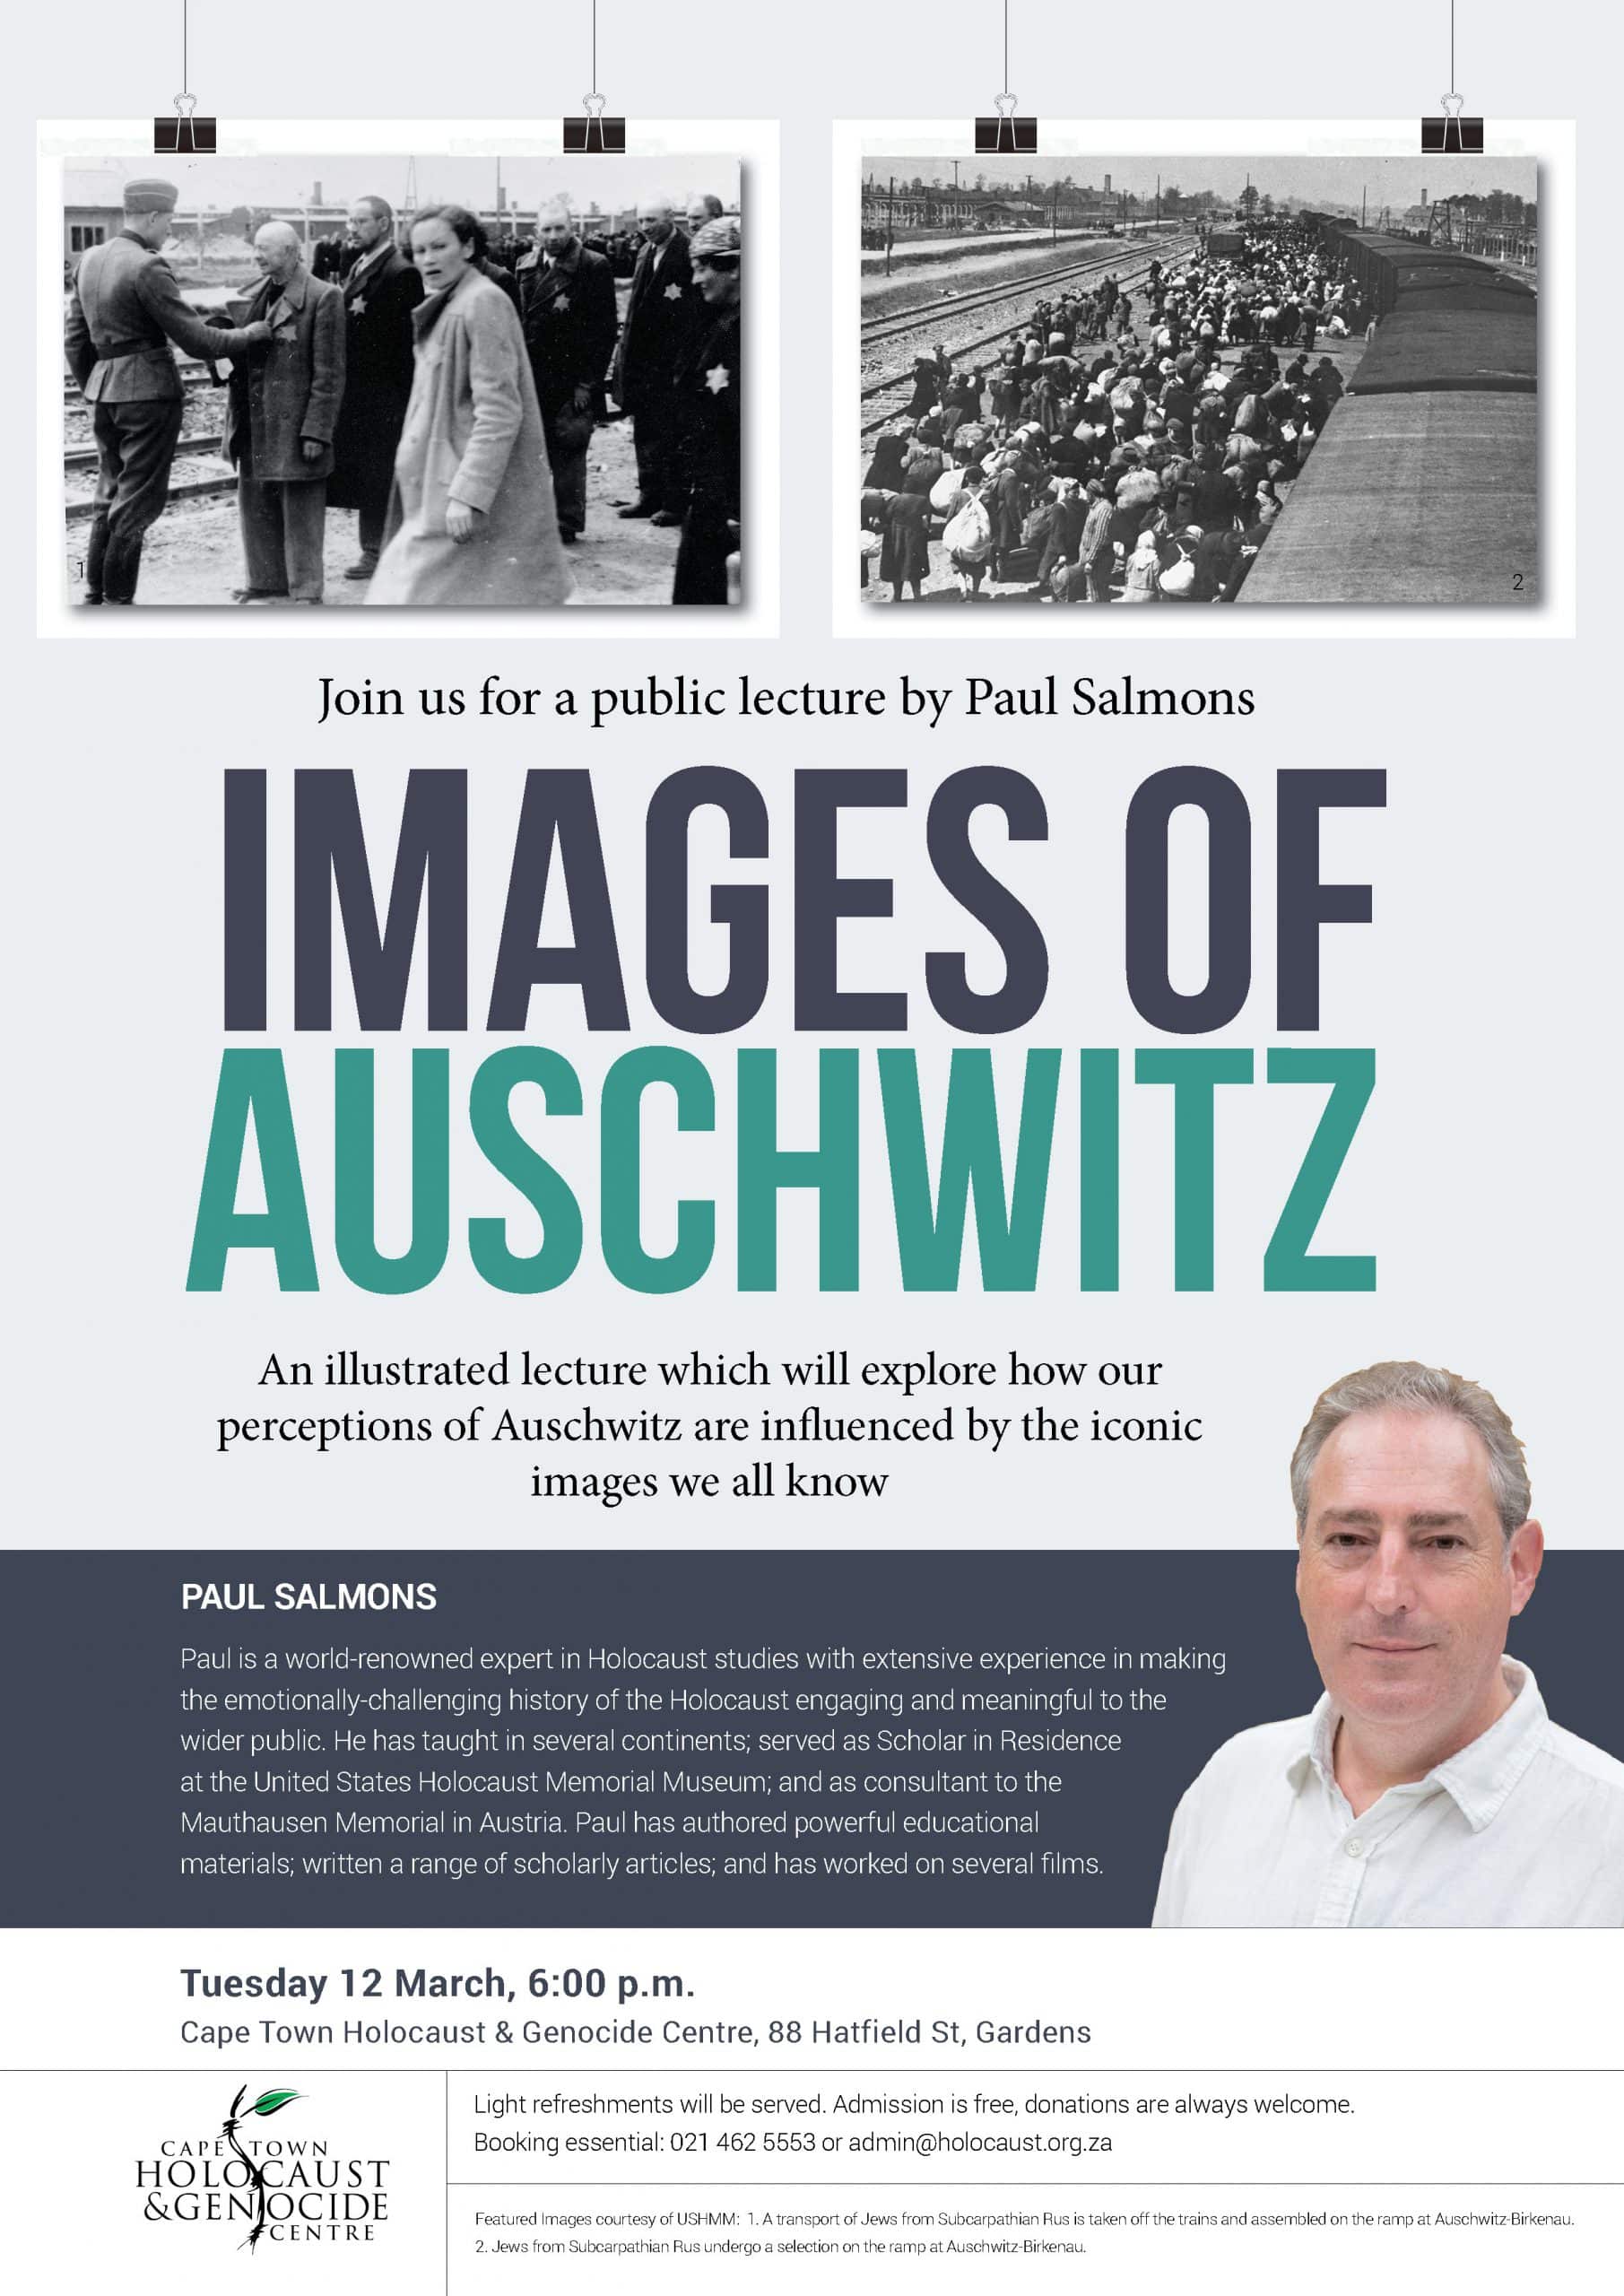 Images of Auschwitz by Paul Salmons CTHGC